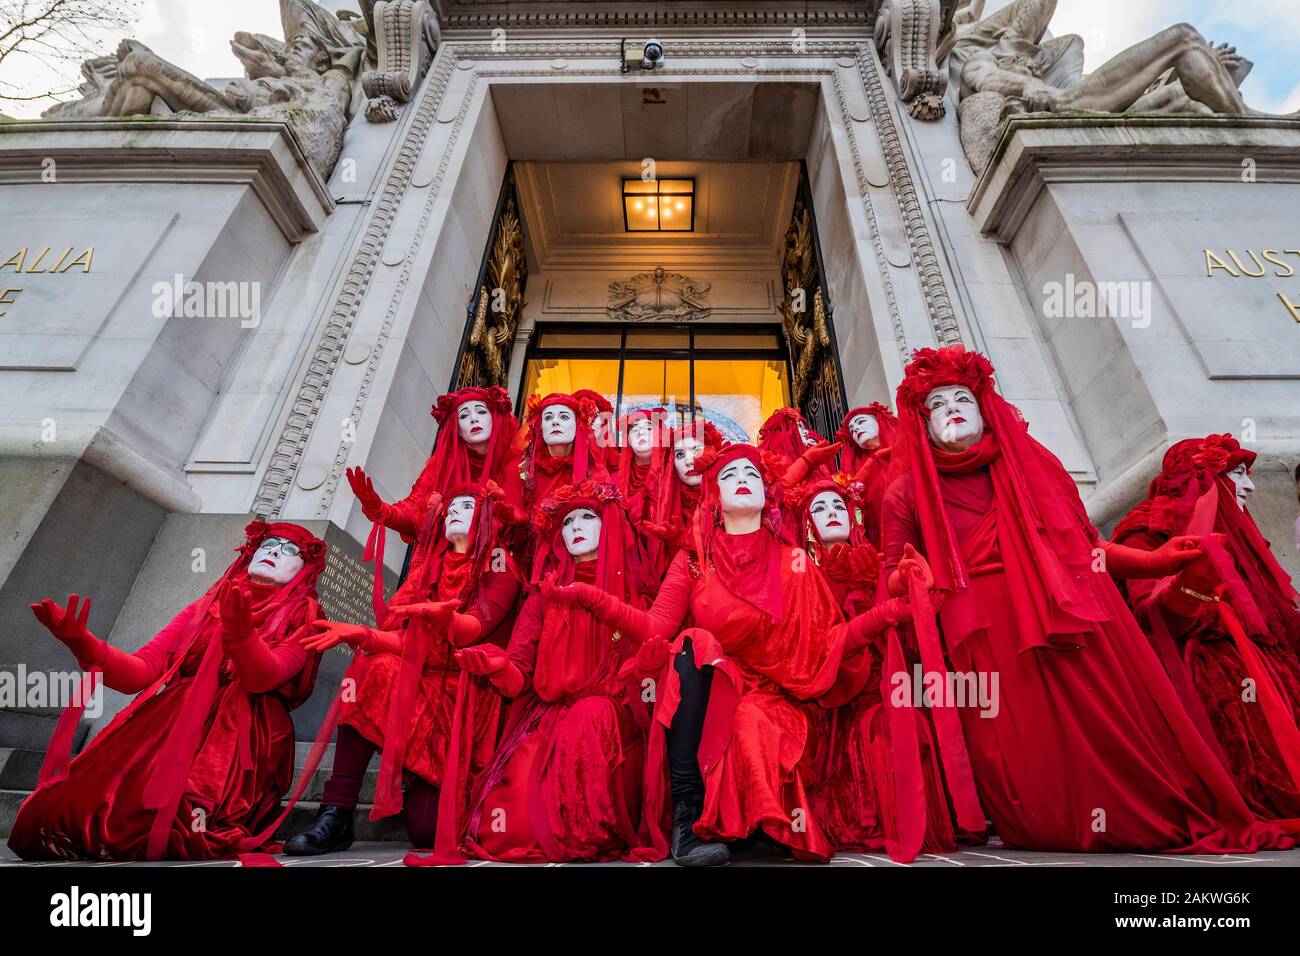 London, UK. 10th Jan 2020. The Red Rebels arrive silently, as usual, and temporarily block the entrance - Extinction rebellion gather outside the Australian High Commission, on the Aldwych, to protest about the attitude of the Australian Government to climate change, in general ,and the forest fires (and their wider impact), in particular. Credit: Guy Bell/Alamy Live News Stock Photo